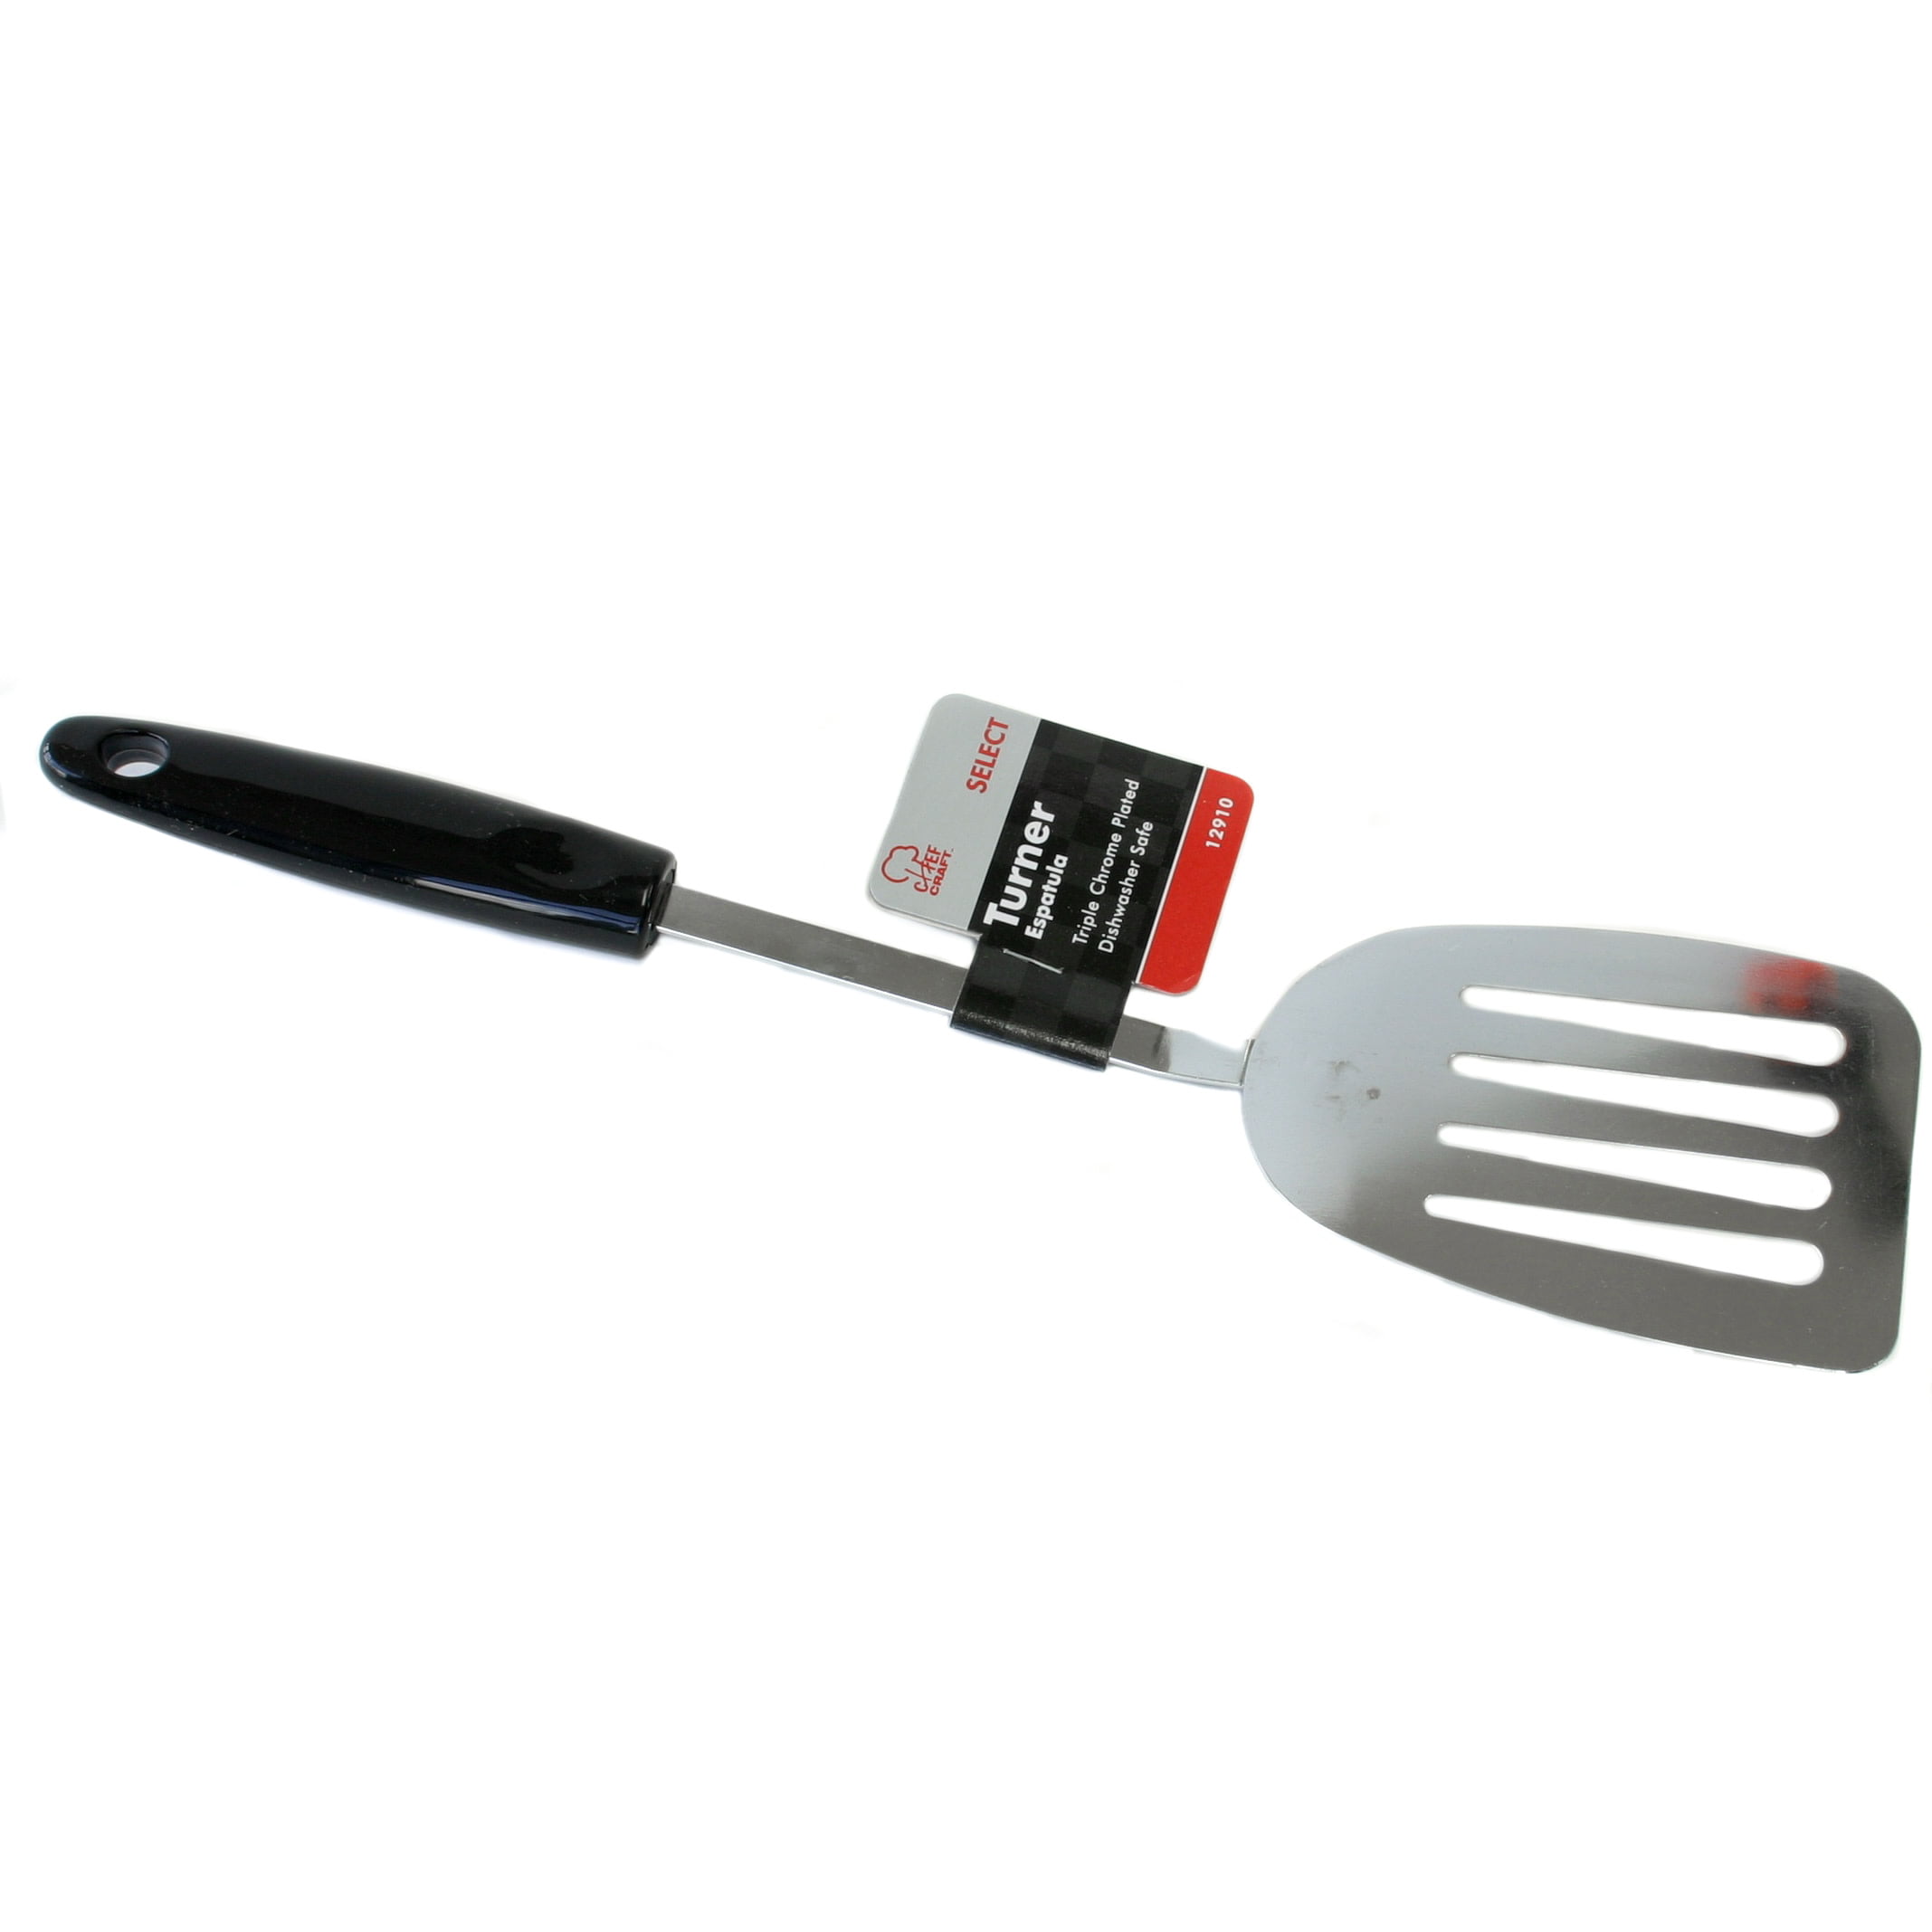 Stainless Steel Cooking Turner| Turner Spatula Cooking Spoon for Flipping  Hot Food| Kitchen Utensil …See more Stainless Steel Cooking Turner| Turner